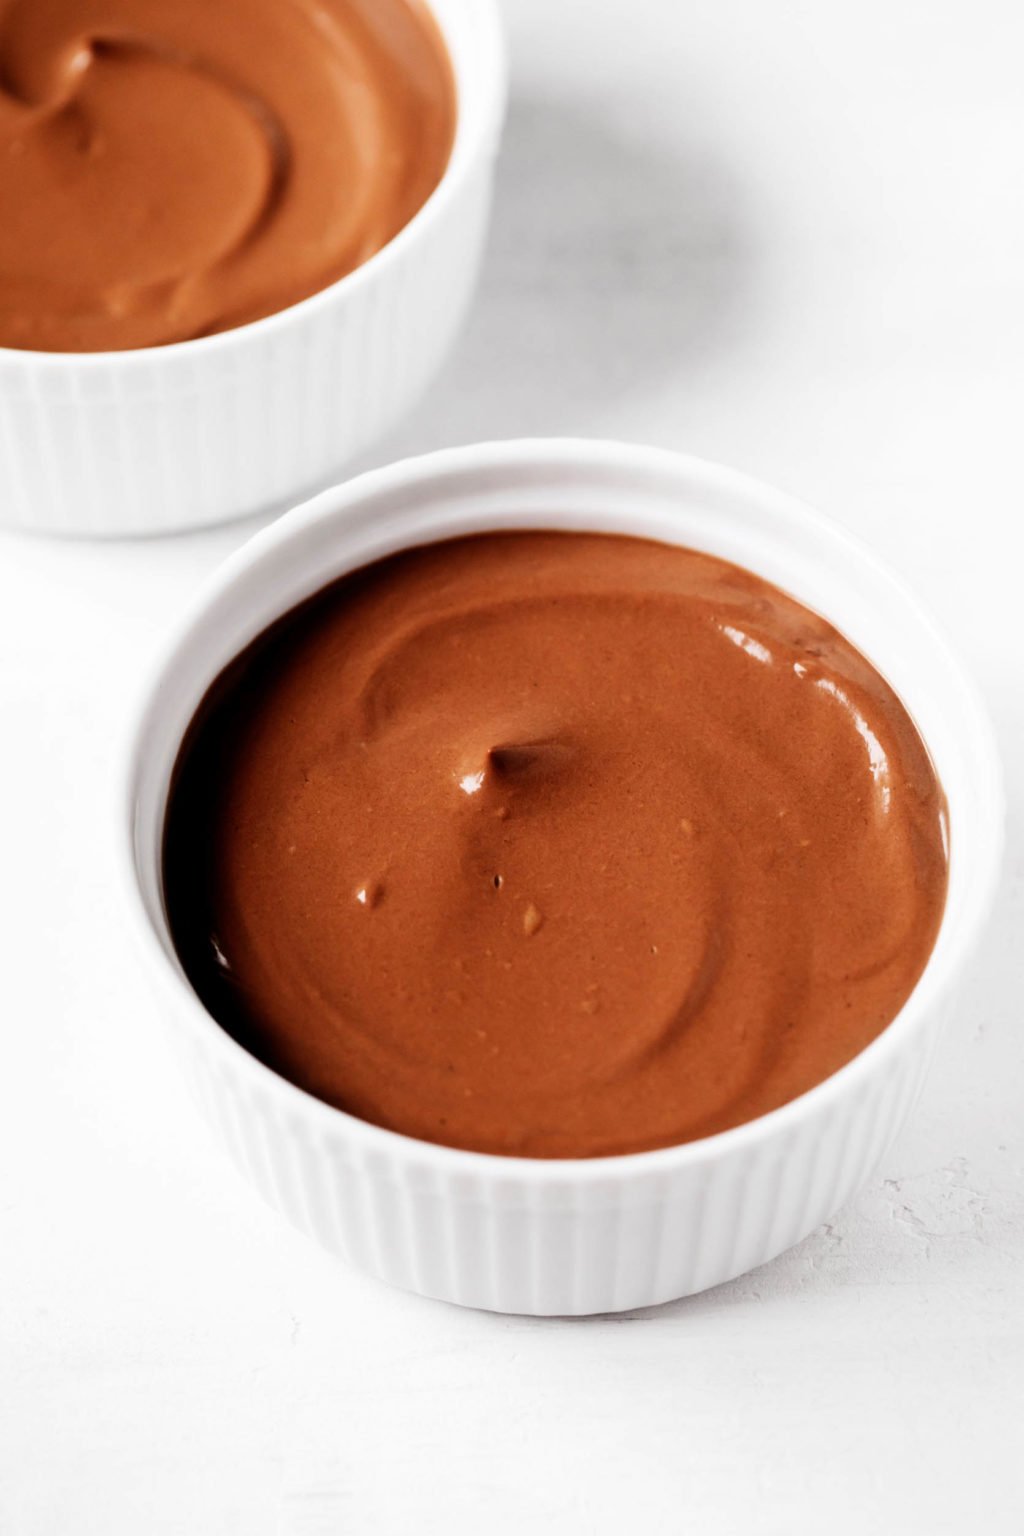 Two white ramekins are filled with a swirled, dairy-free chocolate pudding.